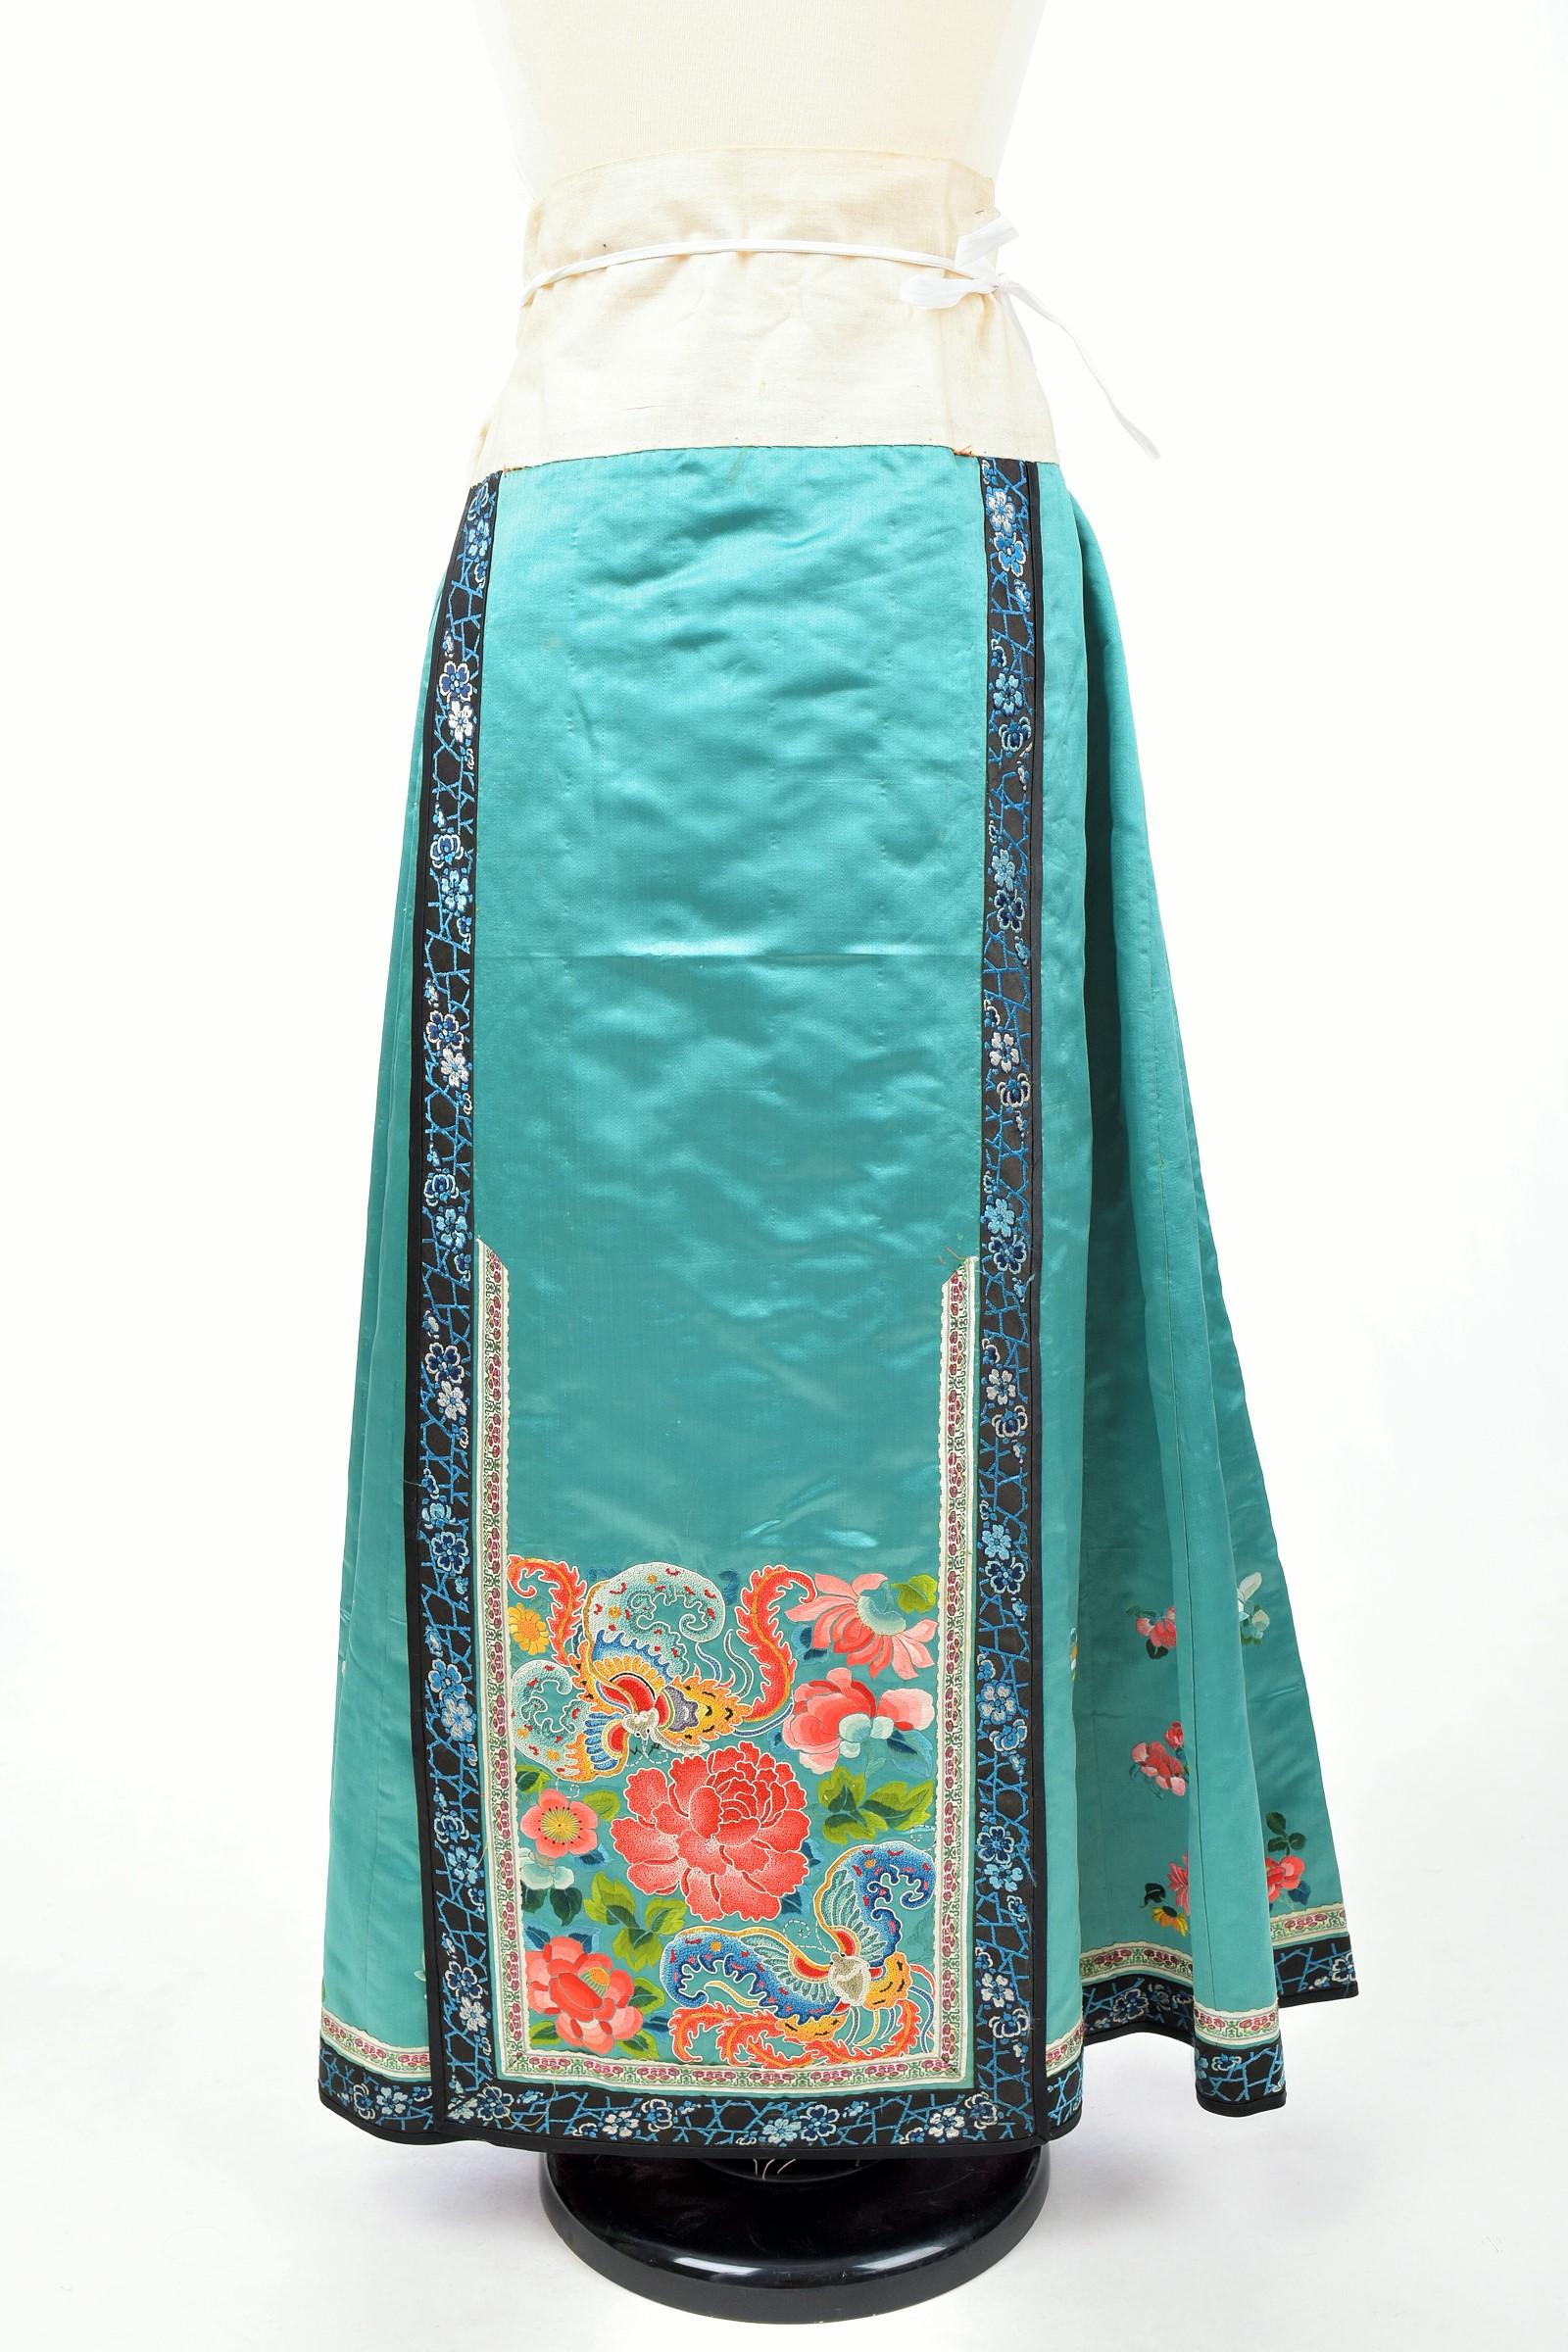 Semi Formal Silk Embroidered Manchu Woman's Skirt and Dress Qing period C.1900 10